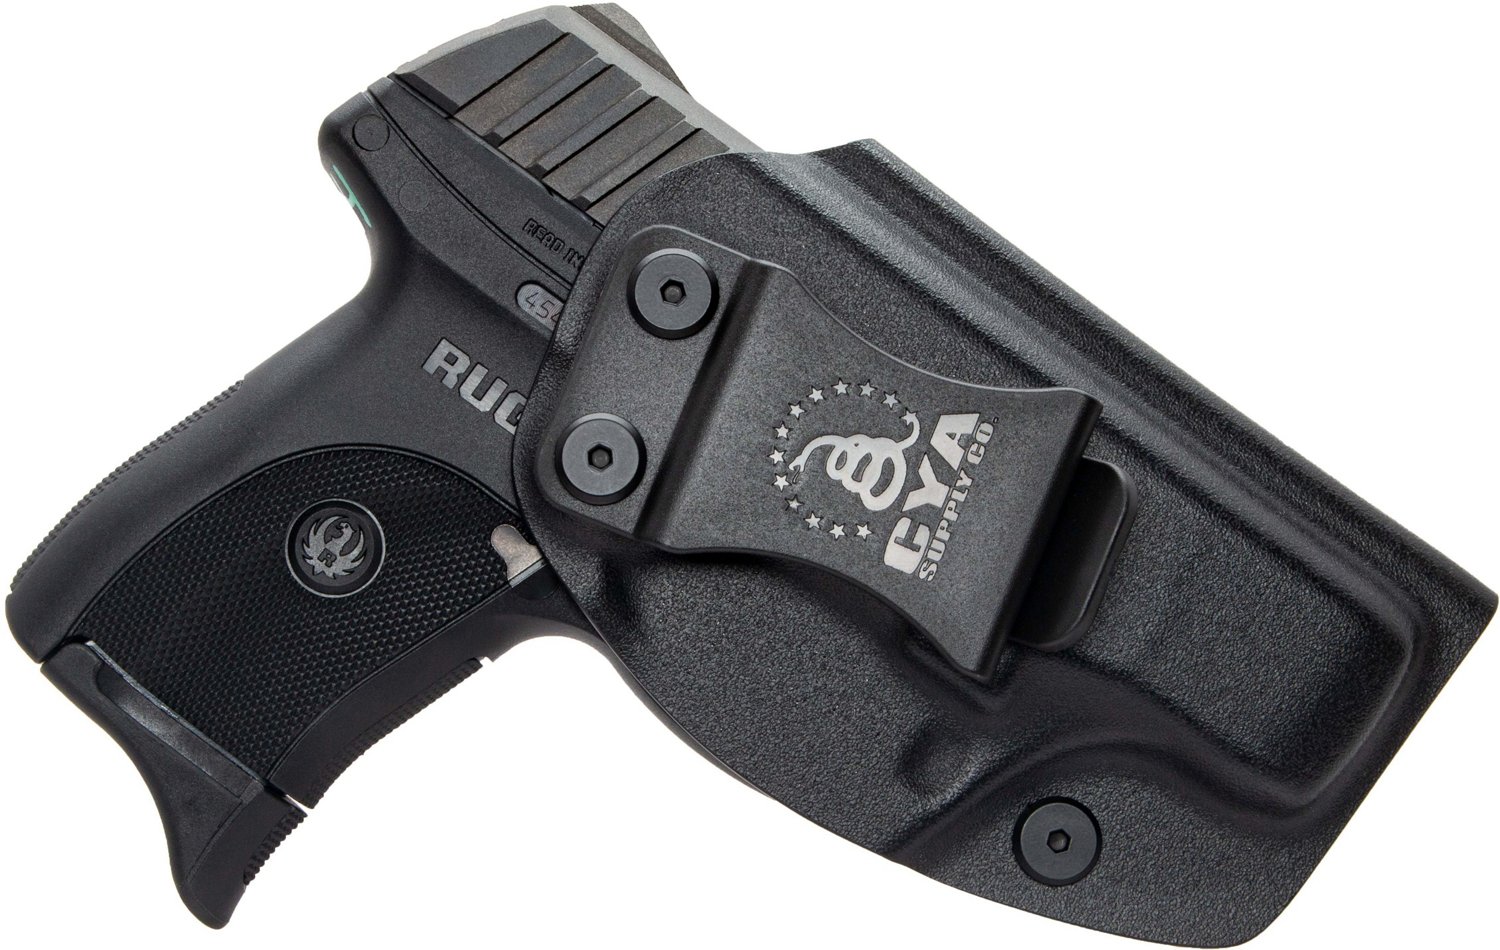 USA MADE RUGER LC380-3C FIT-ALL CONCEAL CARRY COMFORT HOLSTER BY ACE CASE 